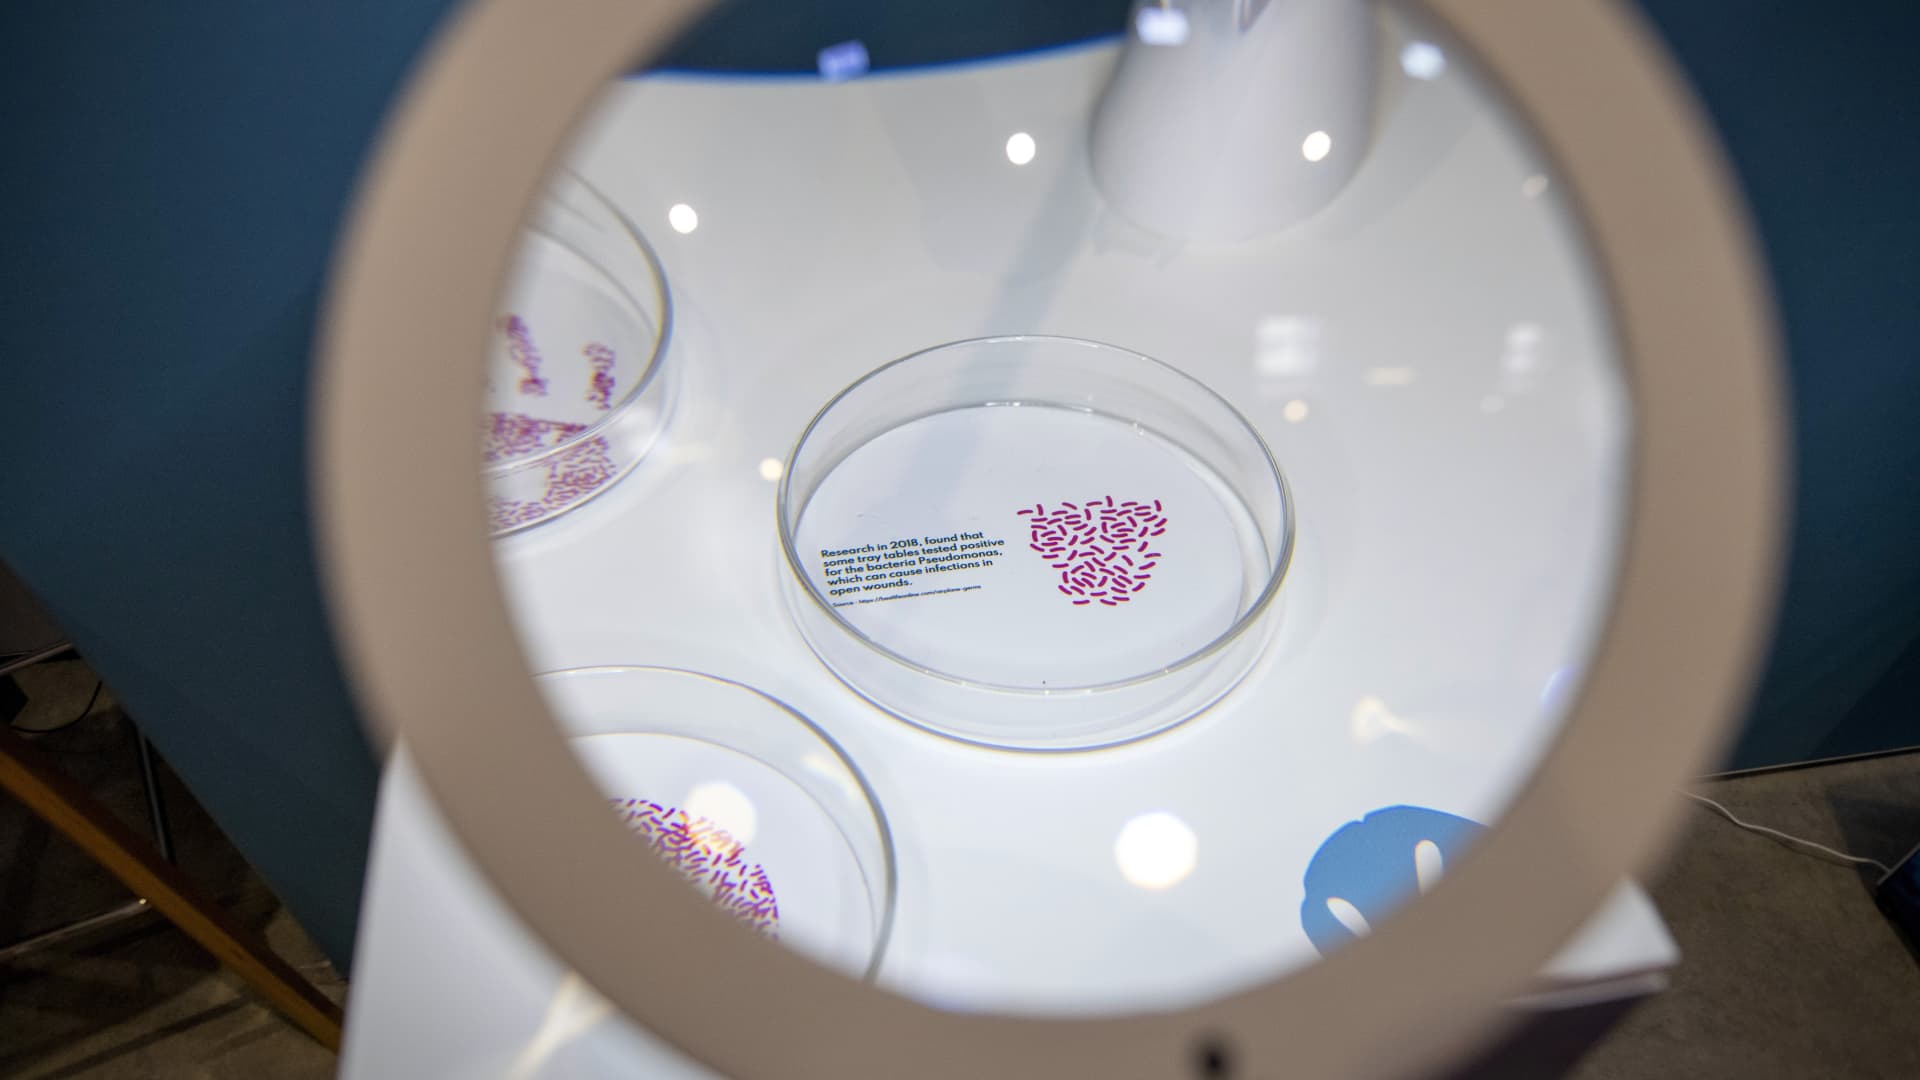 A petri dish remarking on the bacterial contamination of tray tables at the booth for Polygiene AB, which offers antimicrobial, antibacterial and anti odor technology, at the Aircraft Interiors Expo in Hamburg, Germany, on Wednesday, June 15, 2022.